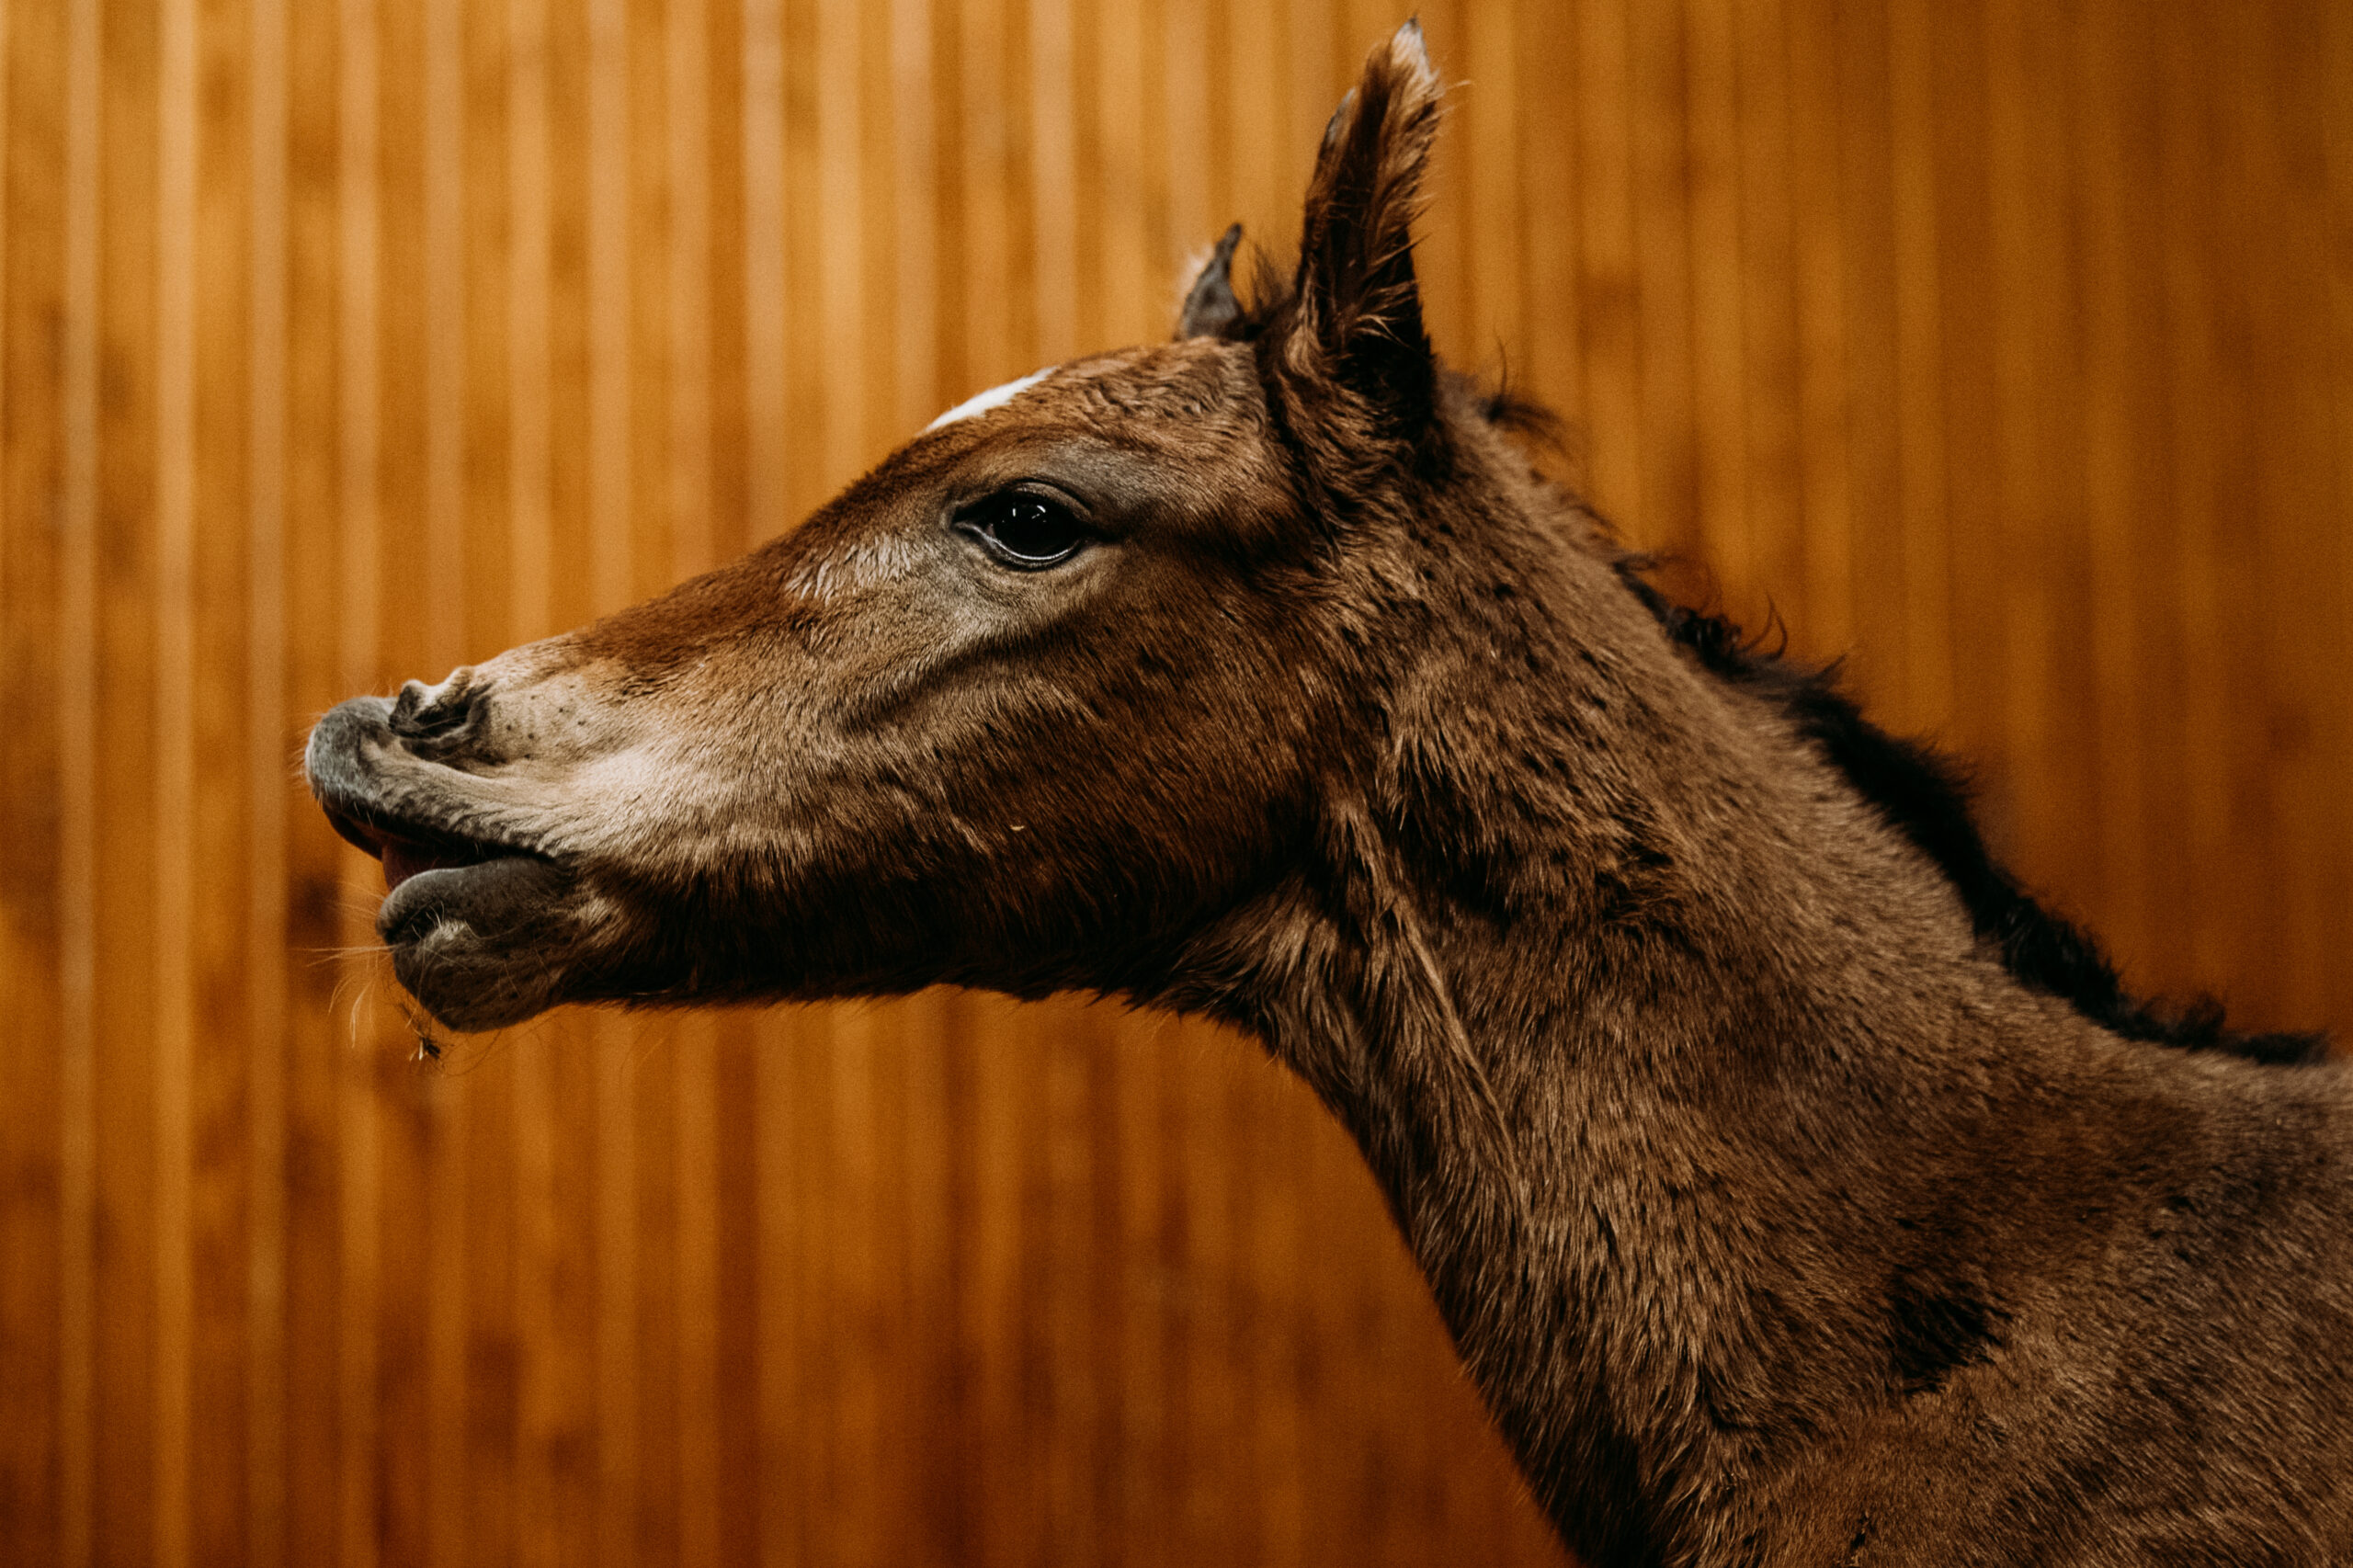 Beholder's third foal, a filly by War Front | Photo by Spendthrift Farm / Autry Graham